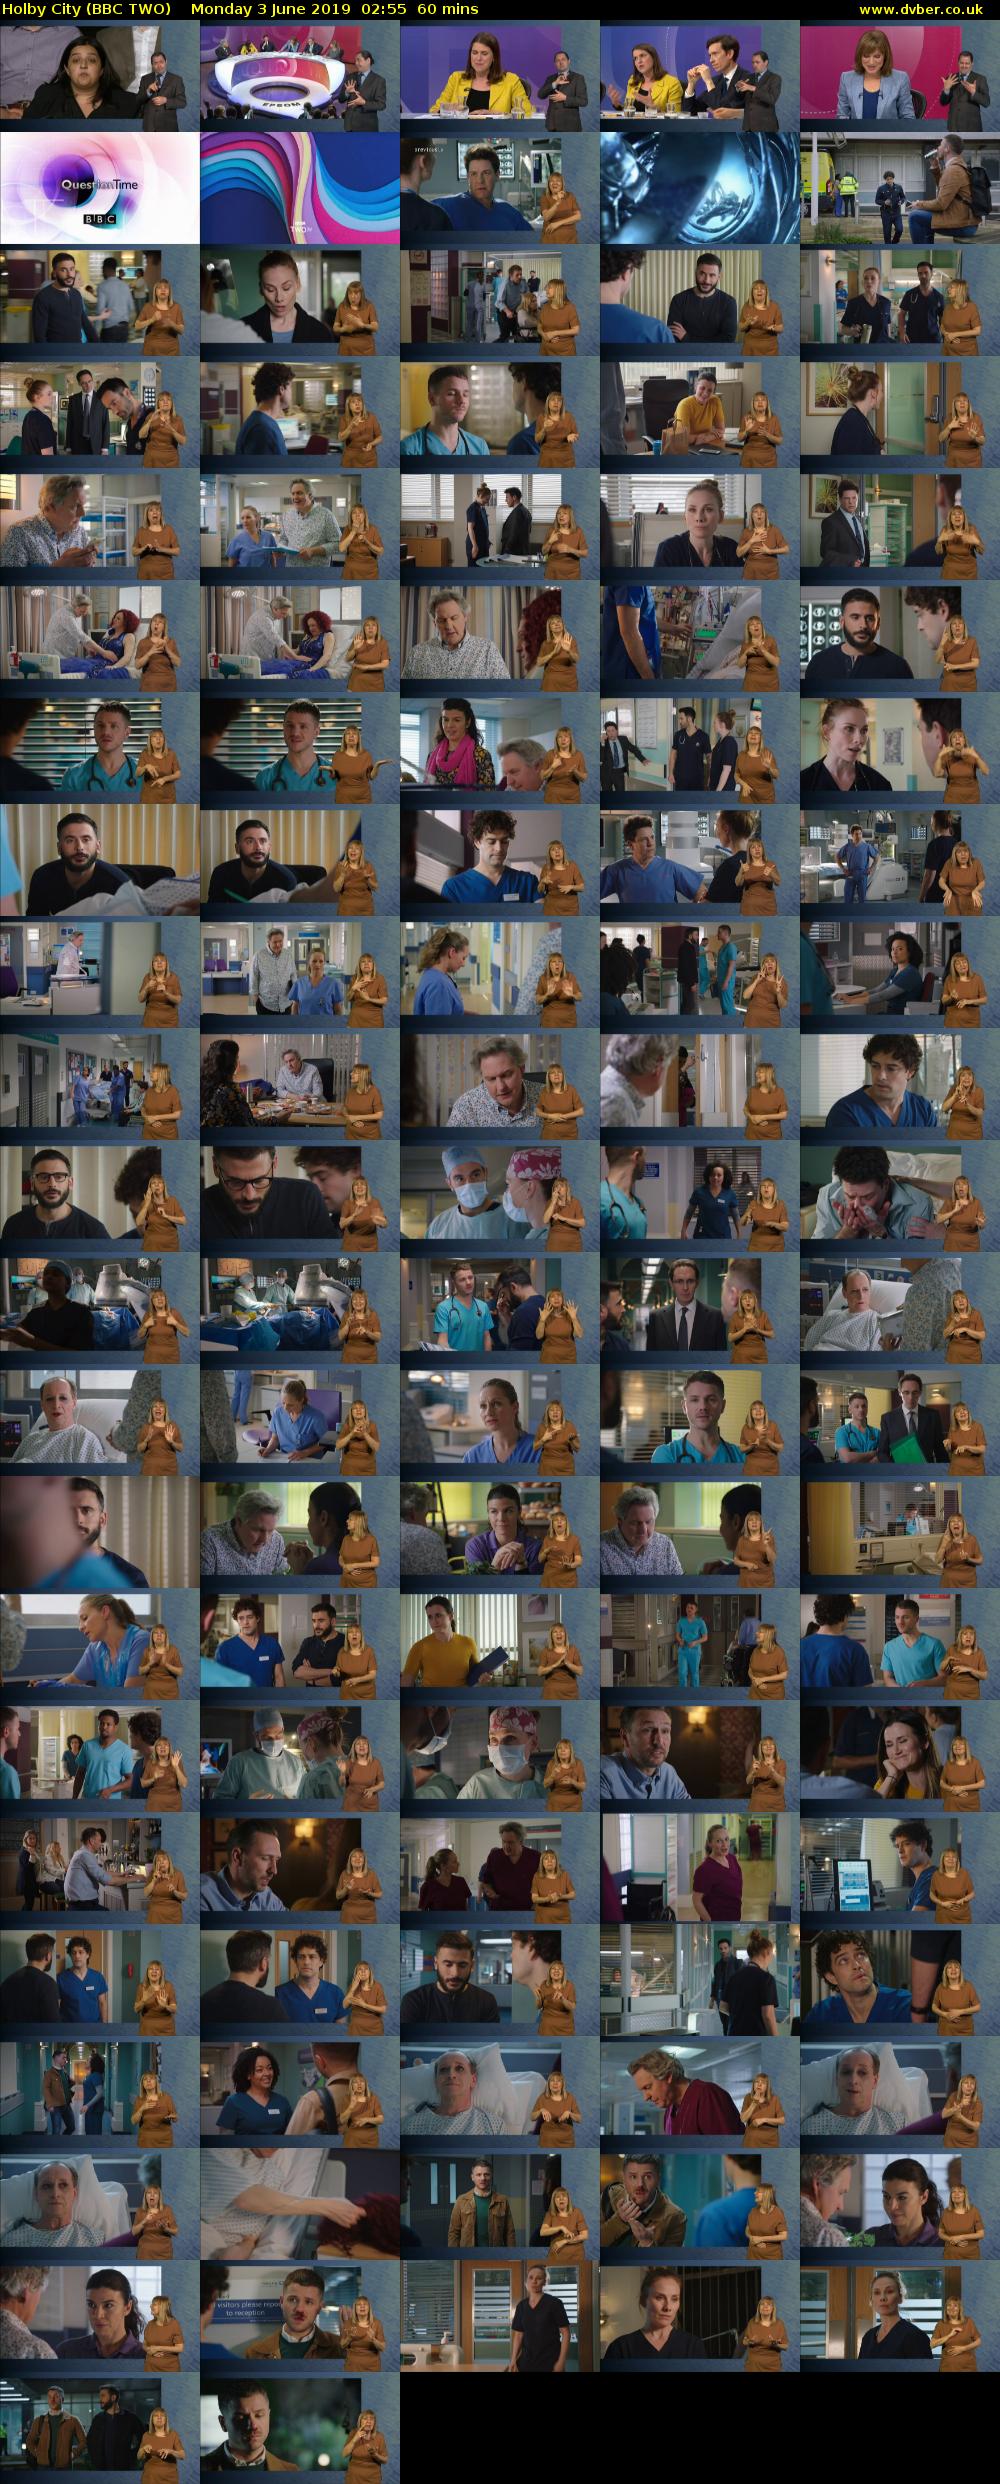 Holby City (BBC TWO) Monday 3 June 2019 02:55 - 03:55